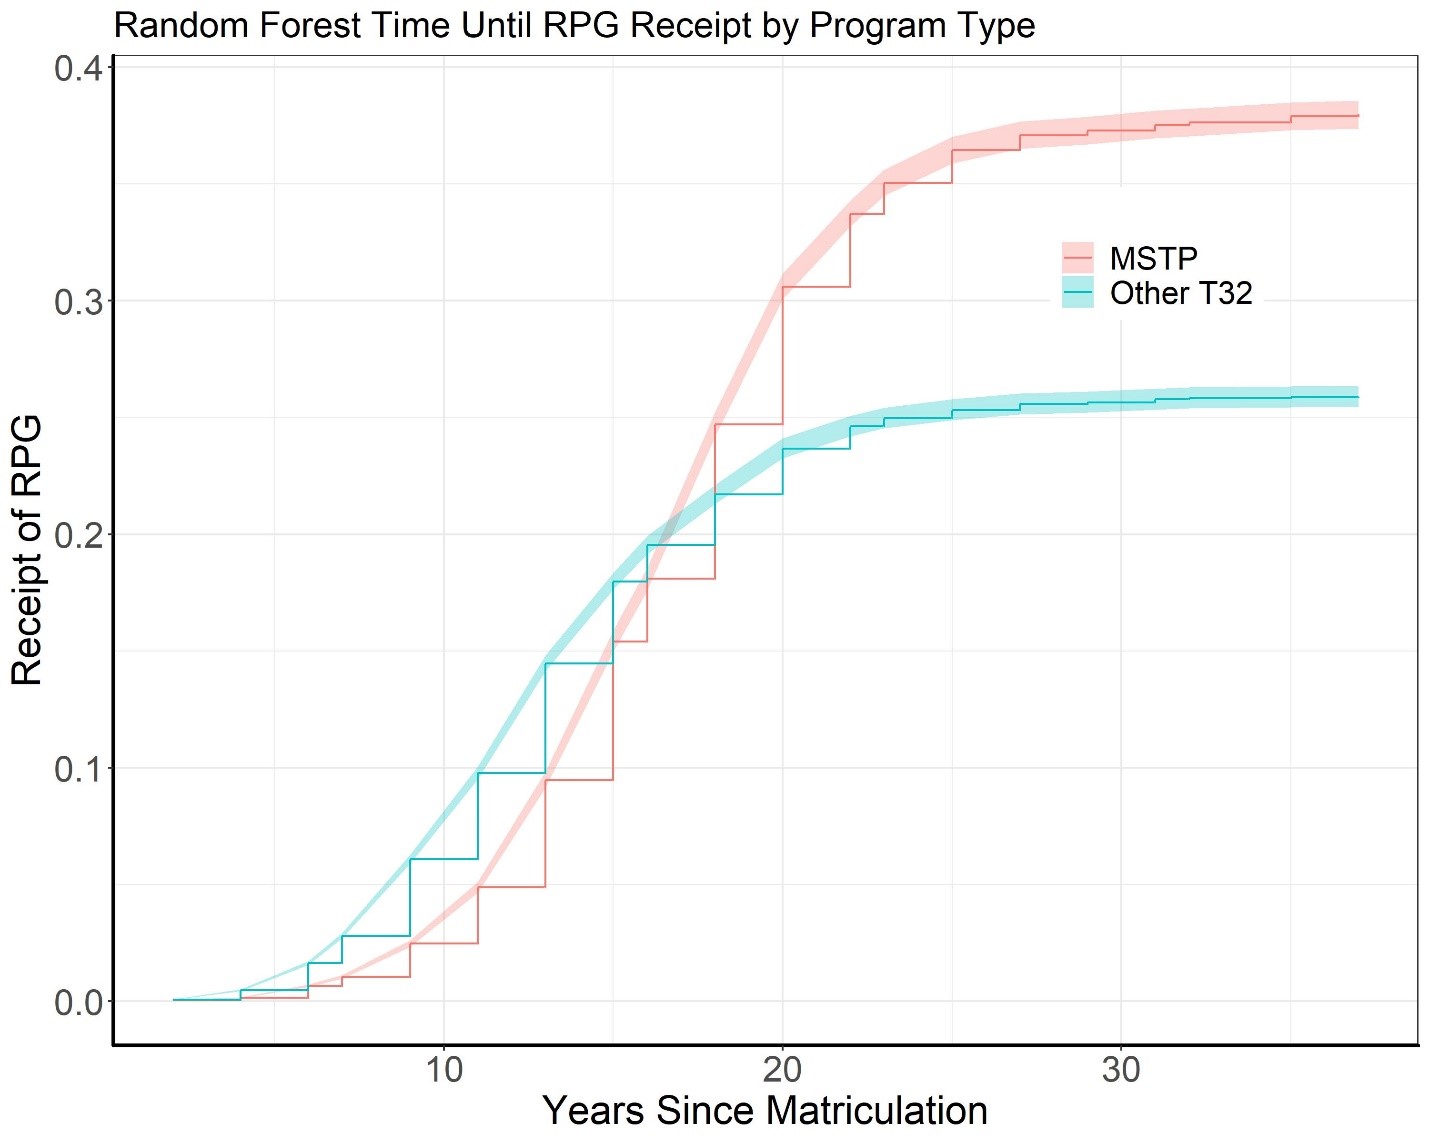 Figure 4 shows survival curves for the rate of receiving an NIH RPG generated by the machine learning analysis comparing MSTP trainees (orange line) with their counterparts in other T32 training programs (blue line). The X axis represents the number of years after matriculation from 0 to 40, while the Y axis represents the rate at which an MSTP or another trainee may receive an NIH RPG. 